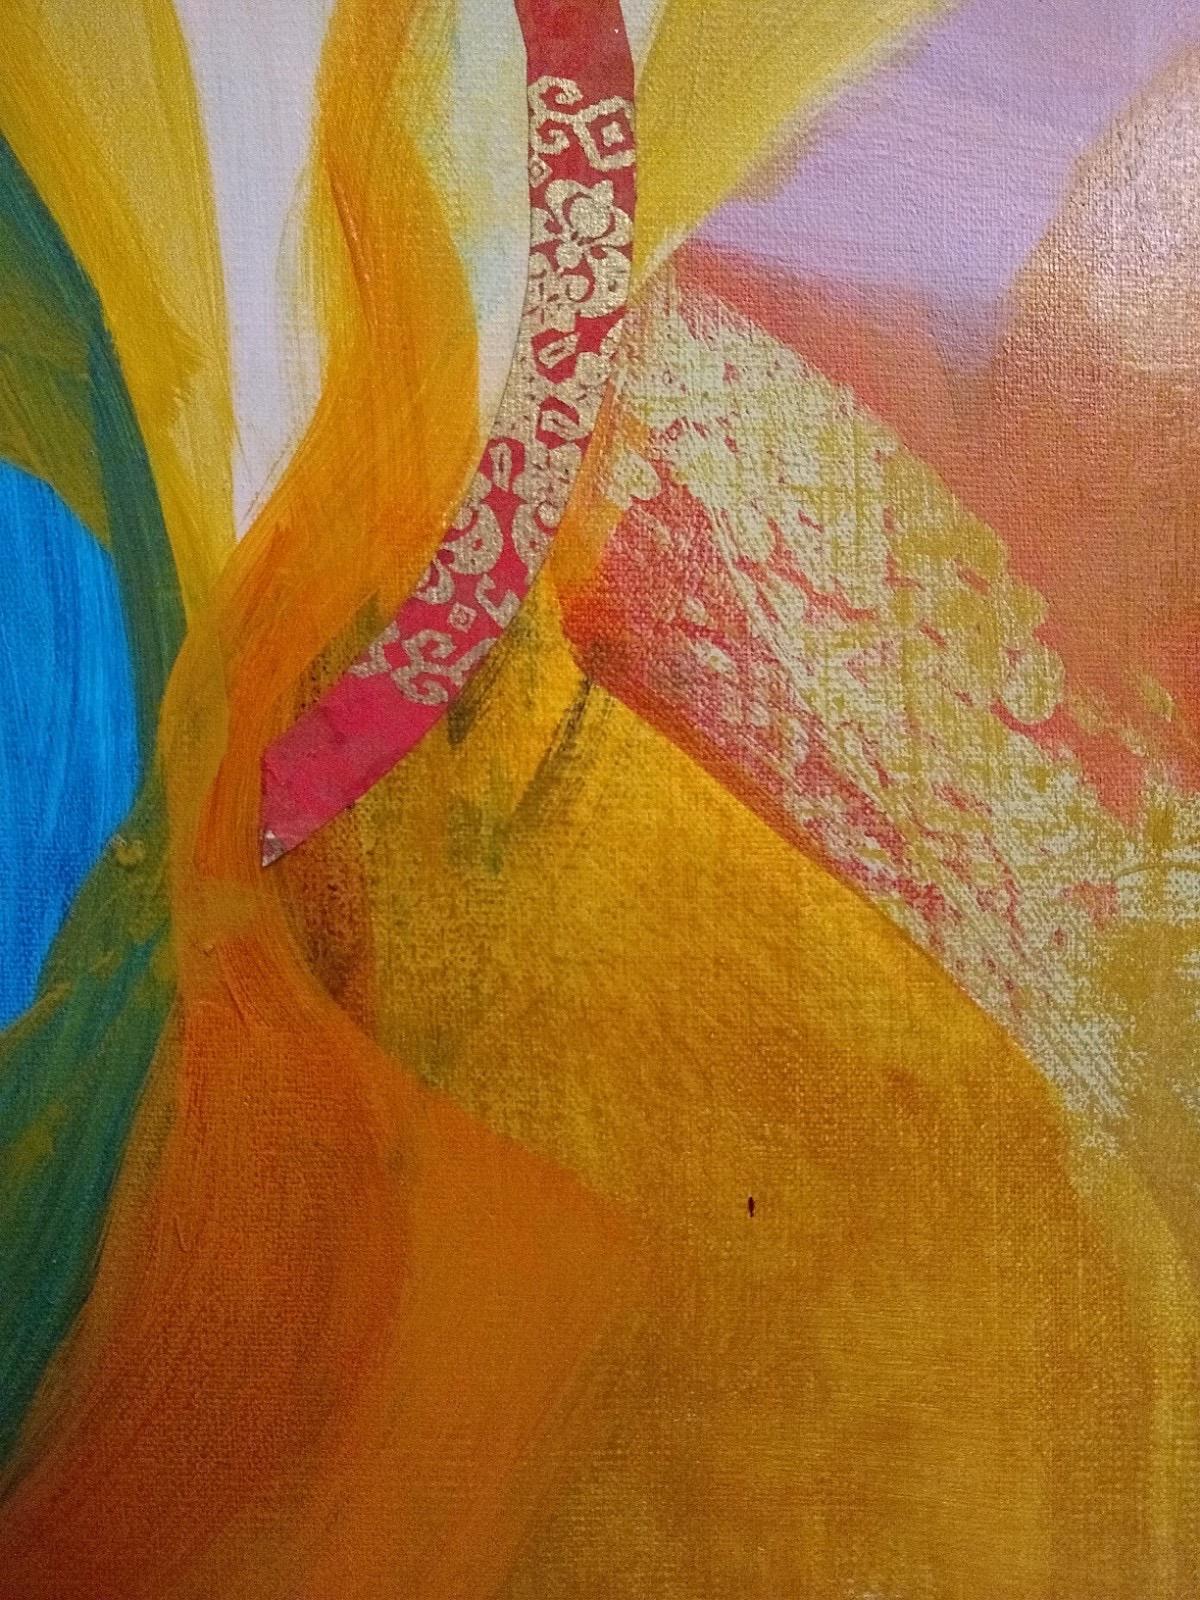 Solid Gold, contemporary gestural organic abstract in complimentary colors - Painting by Ginger Danz